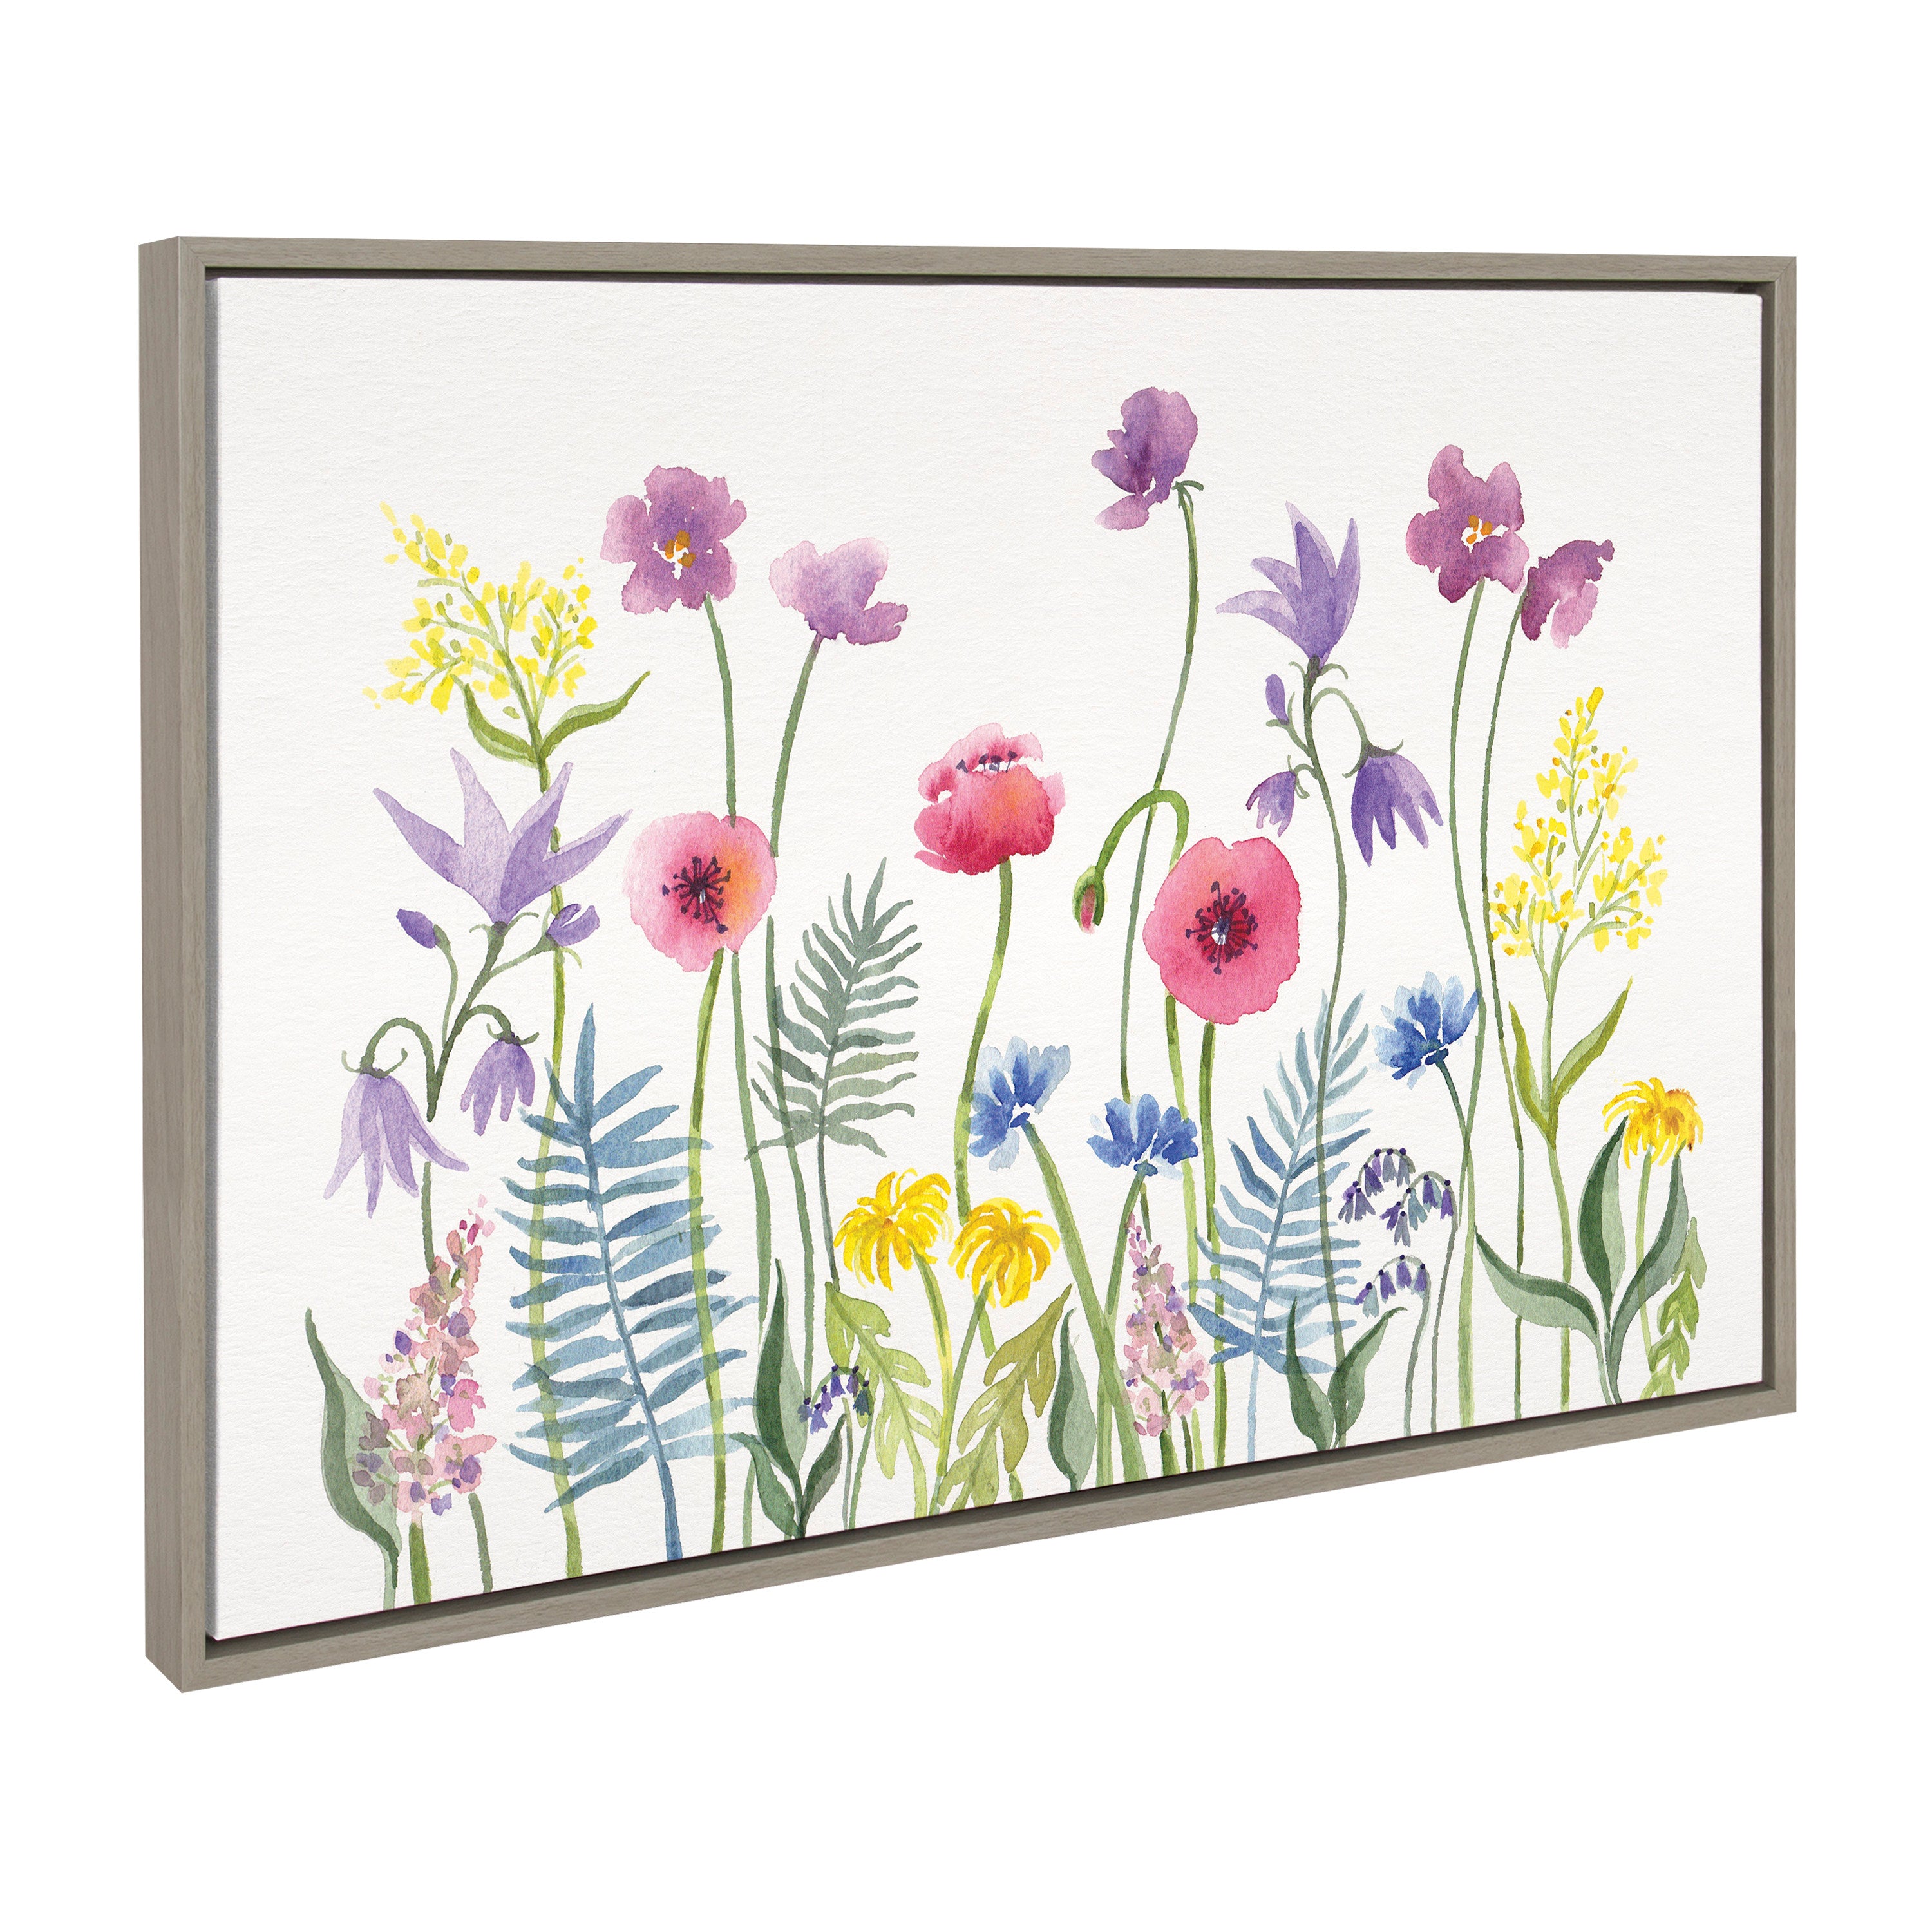 Sylvie Wildflorals Framed Canvas by Patricia Shaw